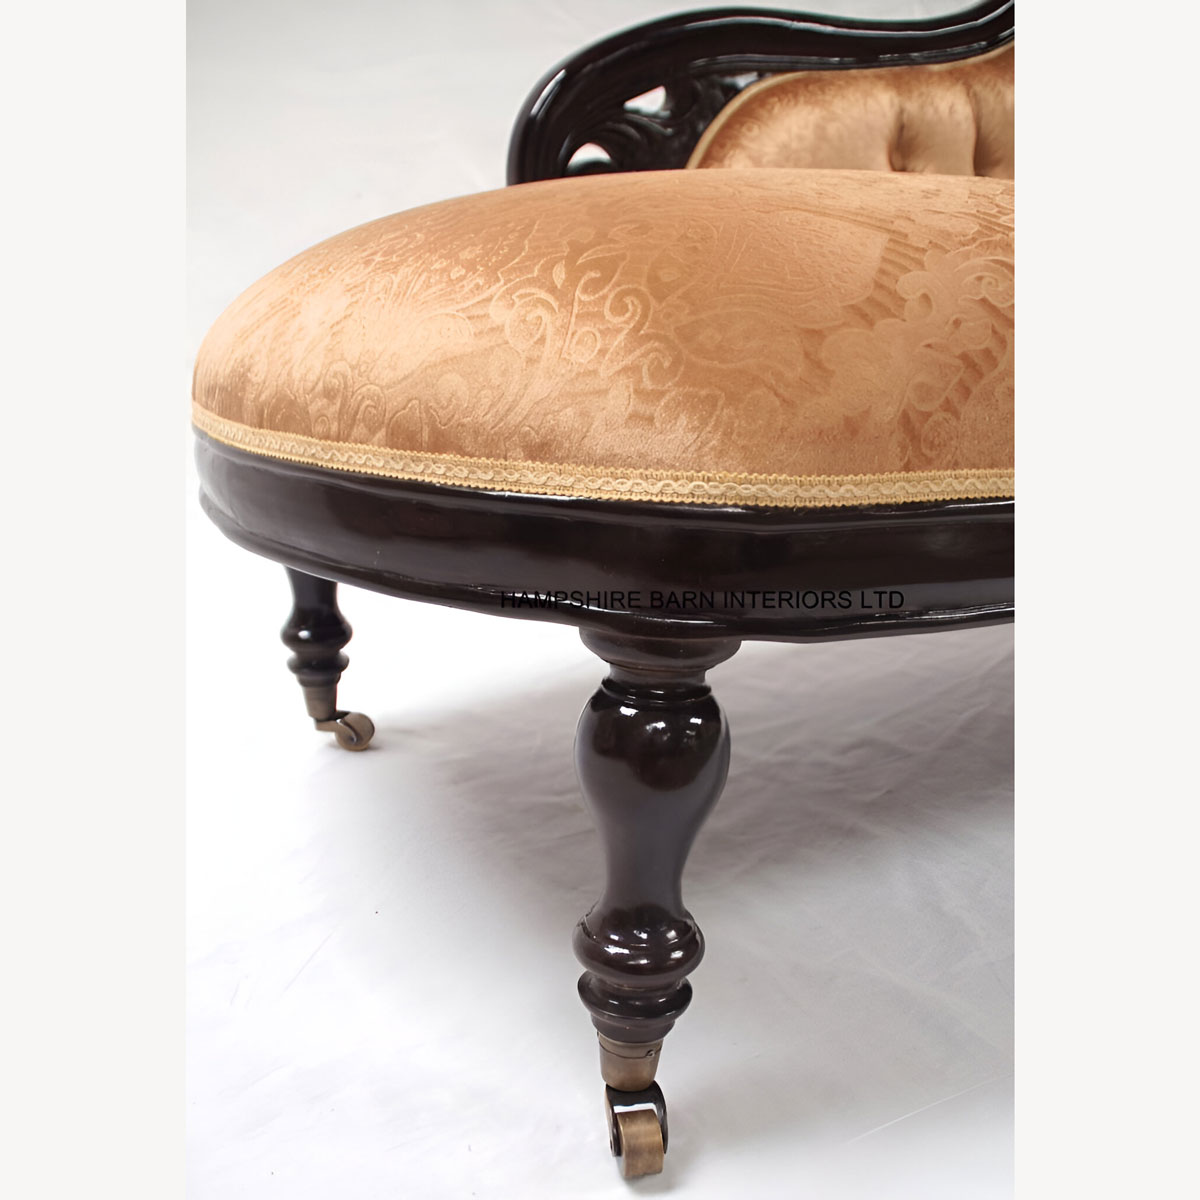 Classical Victorian Style Gold Chaise Longue With Castors With Gold Fabric 3 - Hampshire Barn Interiors - Classical Victorian Style Gold Chaise Longue With Castors With Gold Fabric -